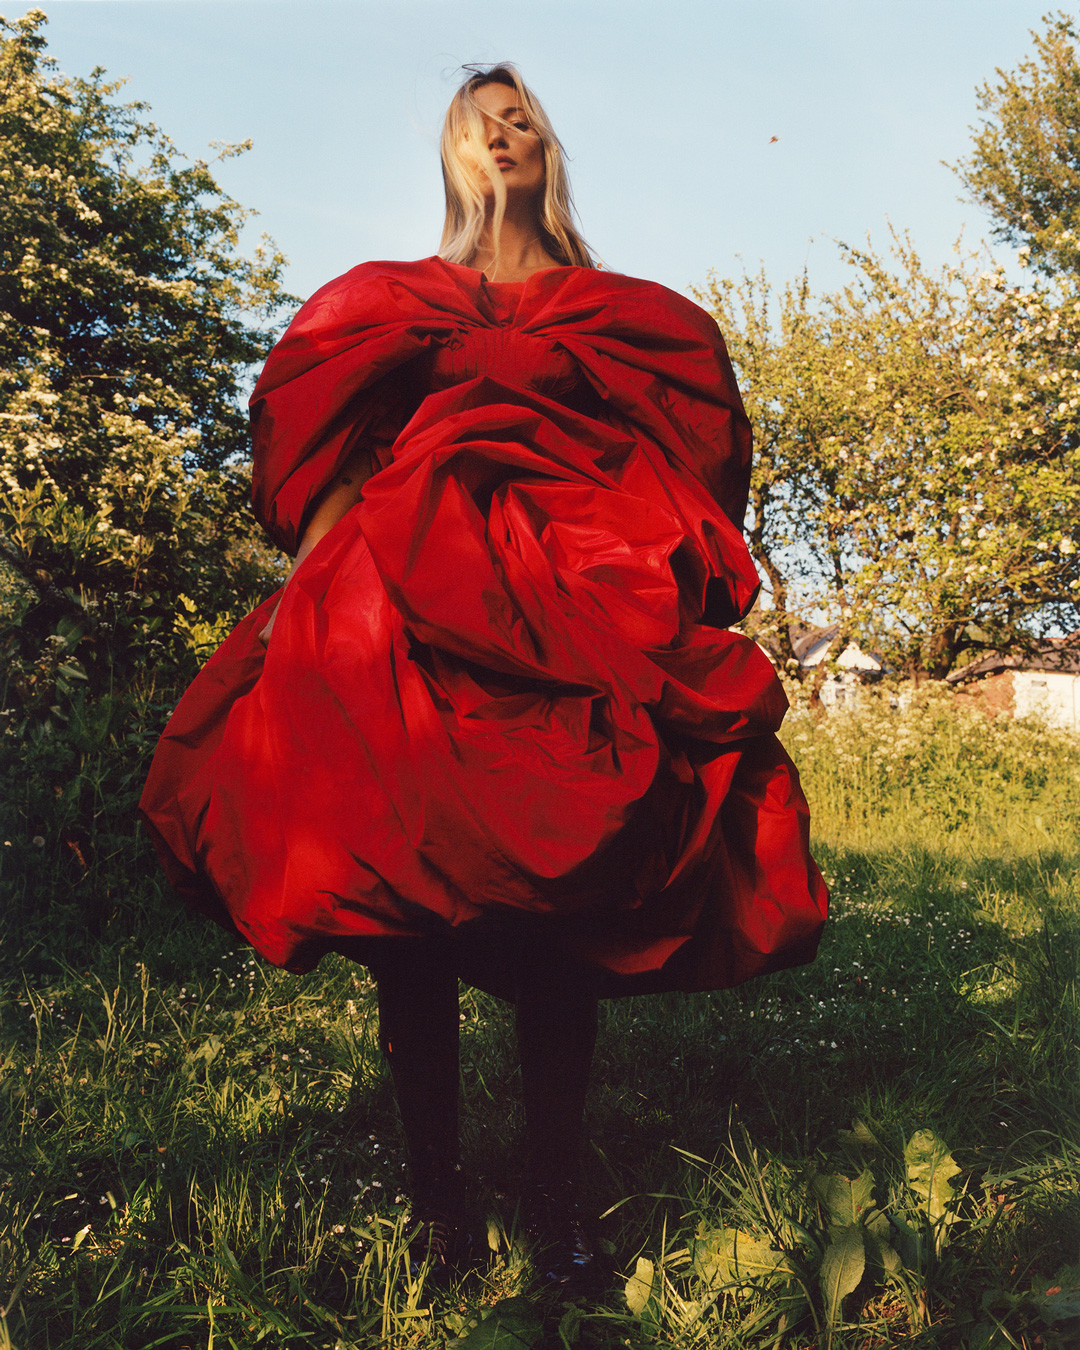 Kate Moss fronts Alexander McQueen's autumn/winter campaign shot by Jamie Hawkesworth